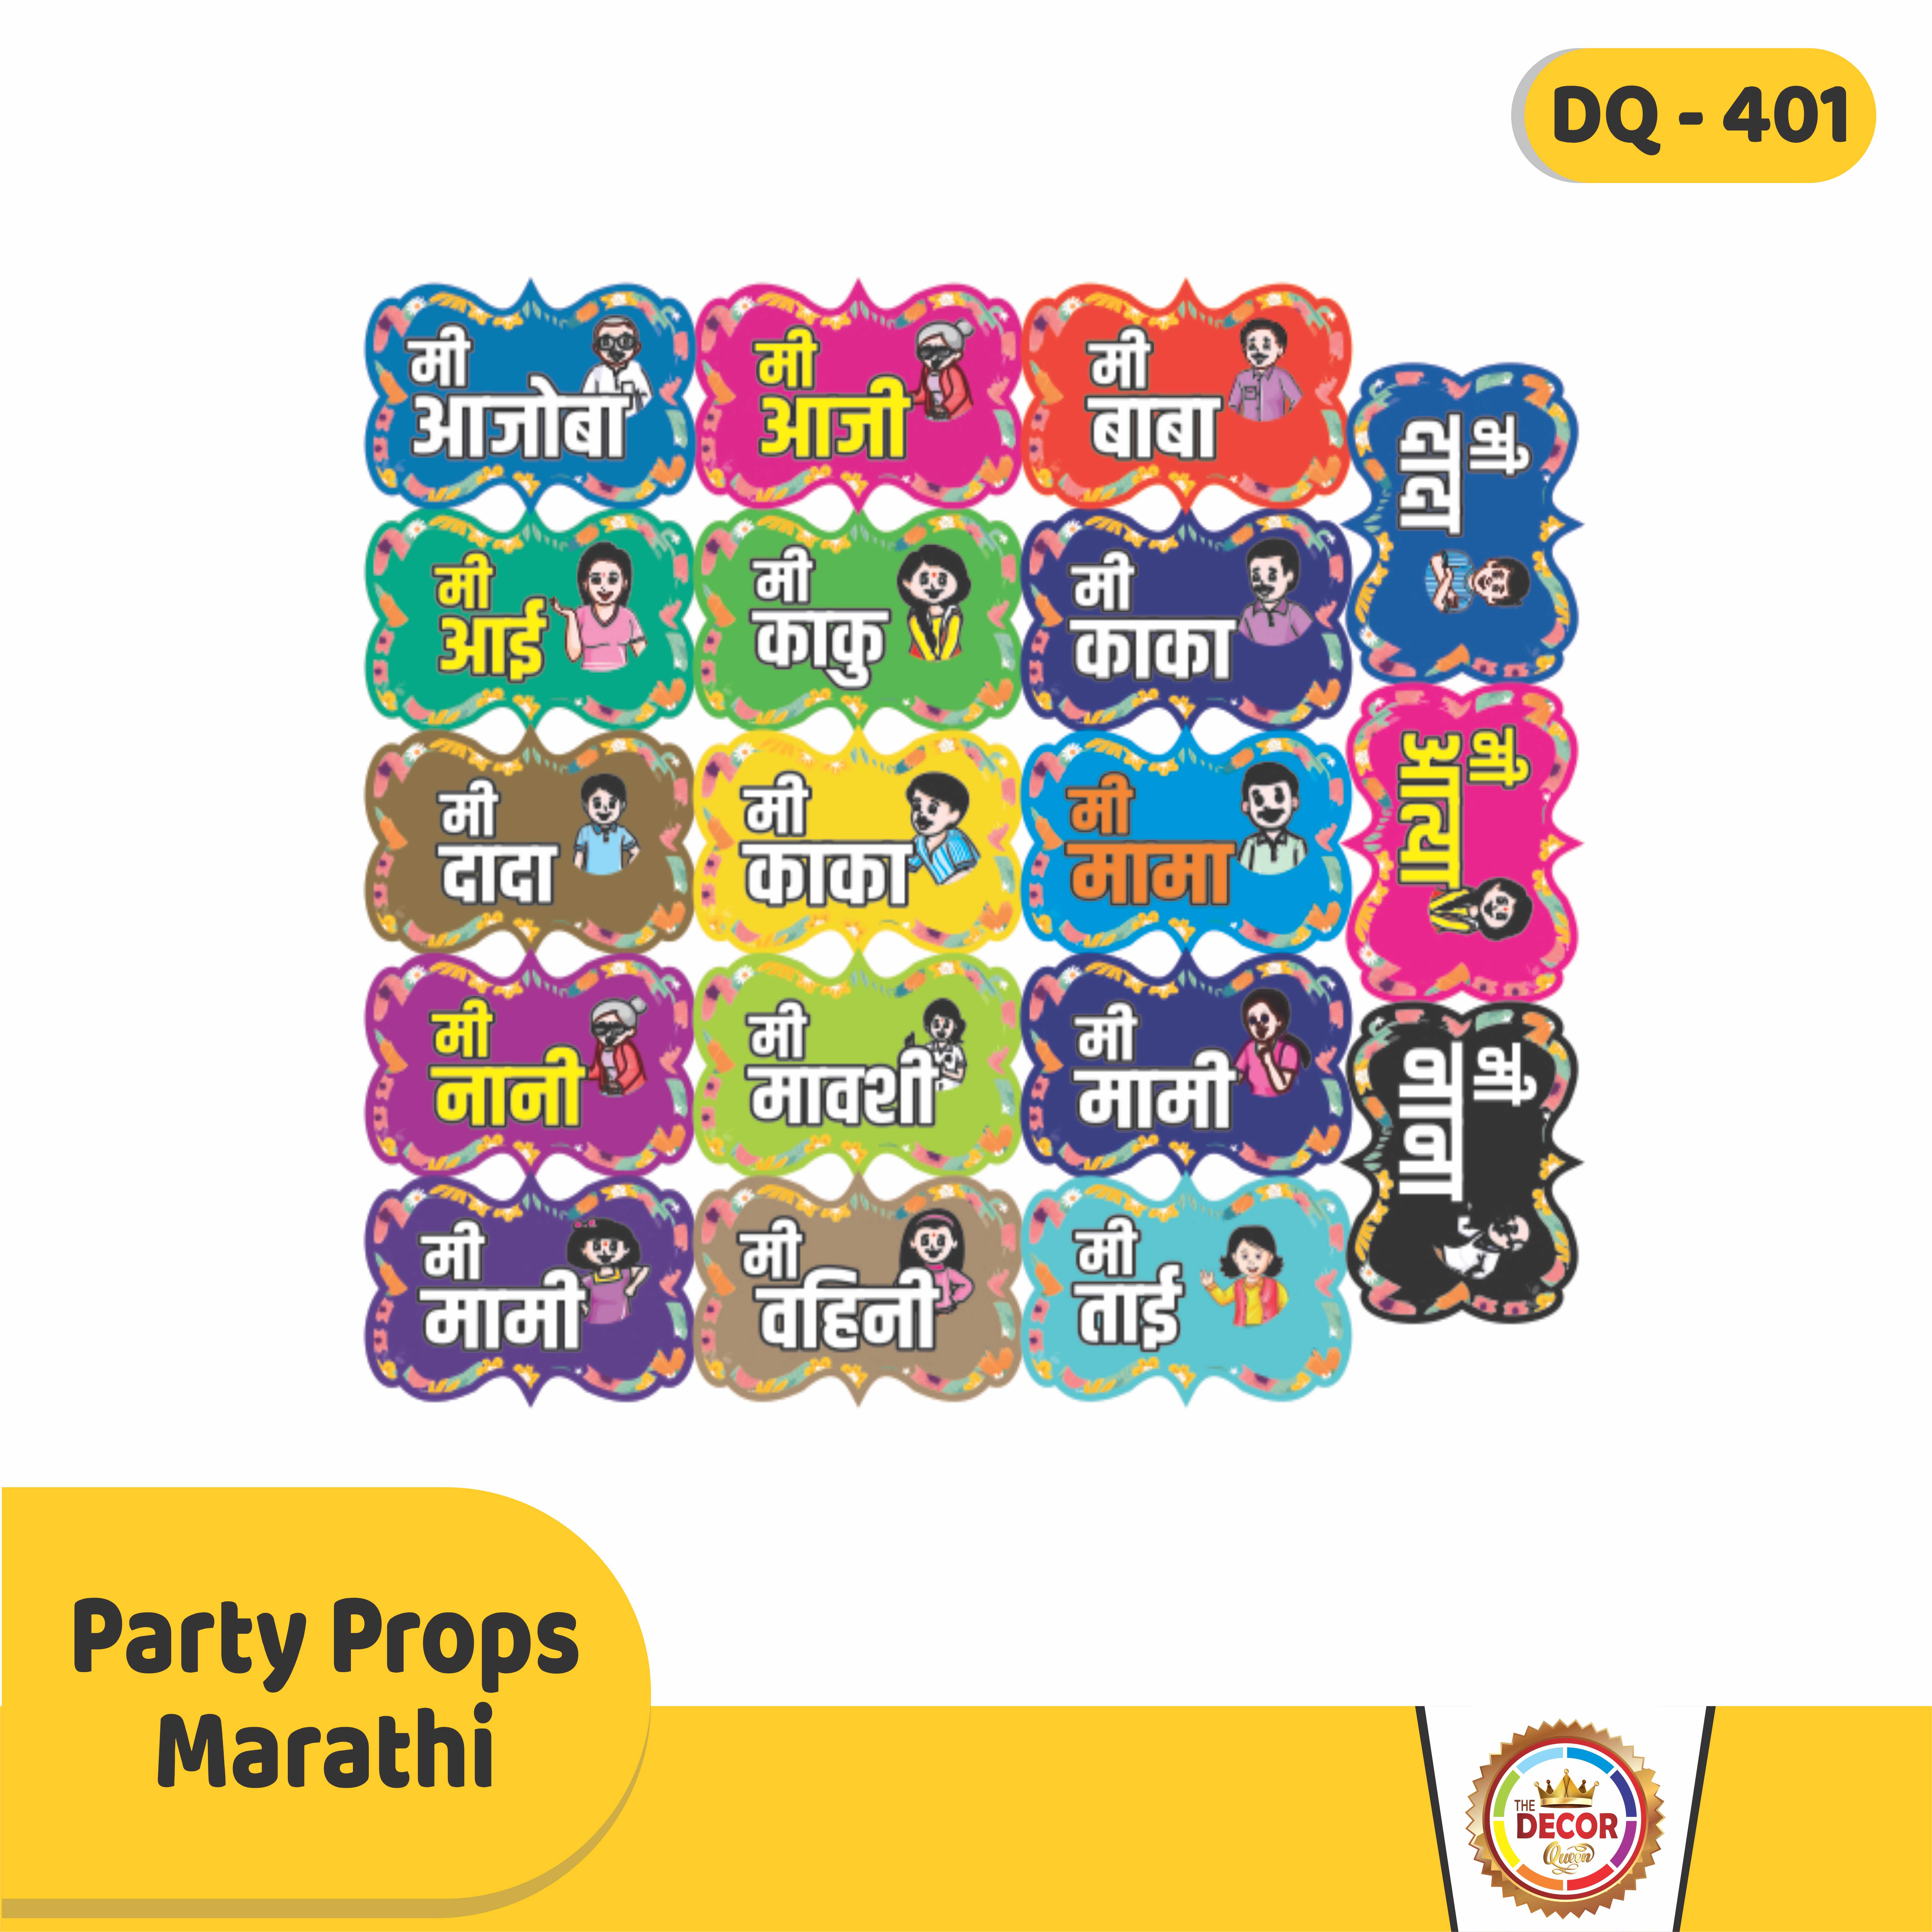 PARTY PROPS MARATHI|Party Products|Party Props